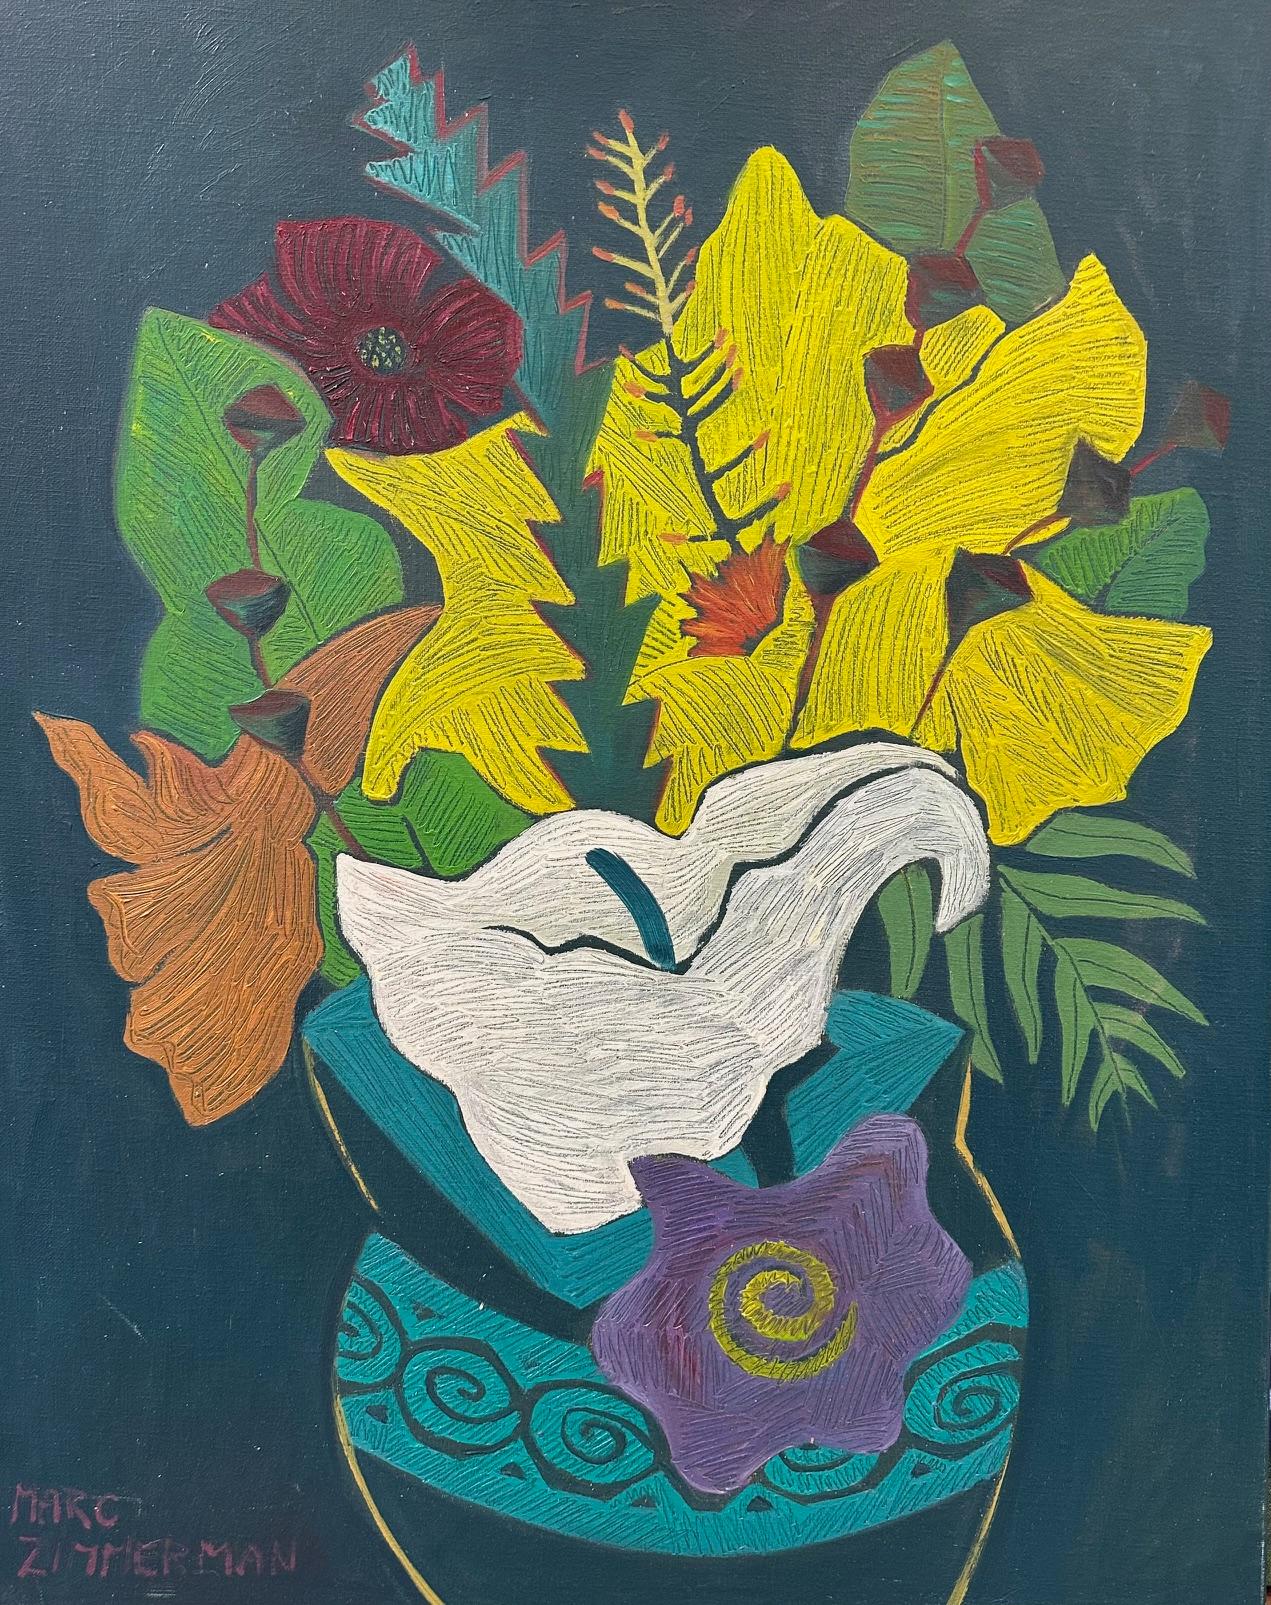 Floral  - Abstract Painting - Oil On Canvas By Marc Zimmerman


Marc Zimmerman creates playful paintings, whether deep mysterious jungle or delightfully whimsical florals. His color palette explores various harmonies yet always surprises with new